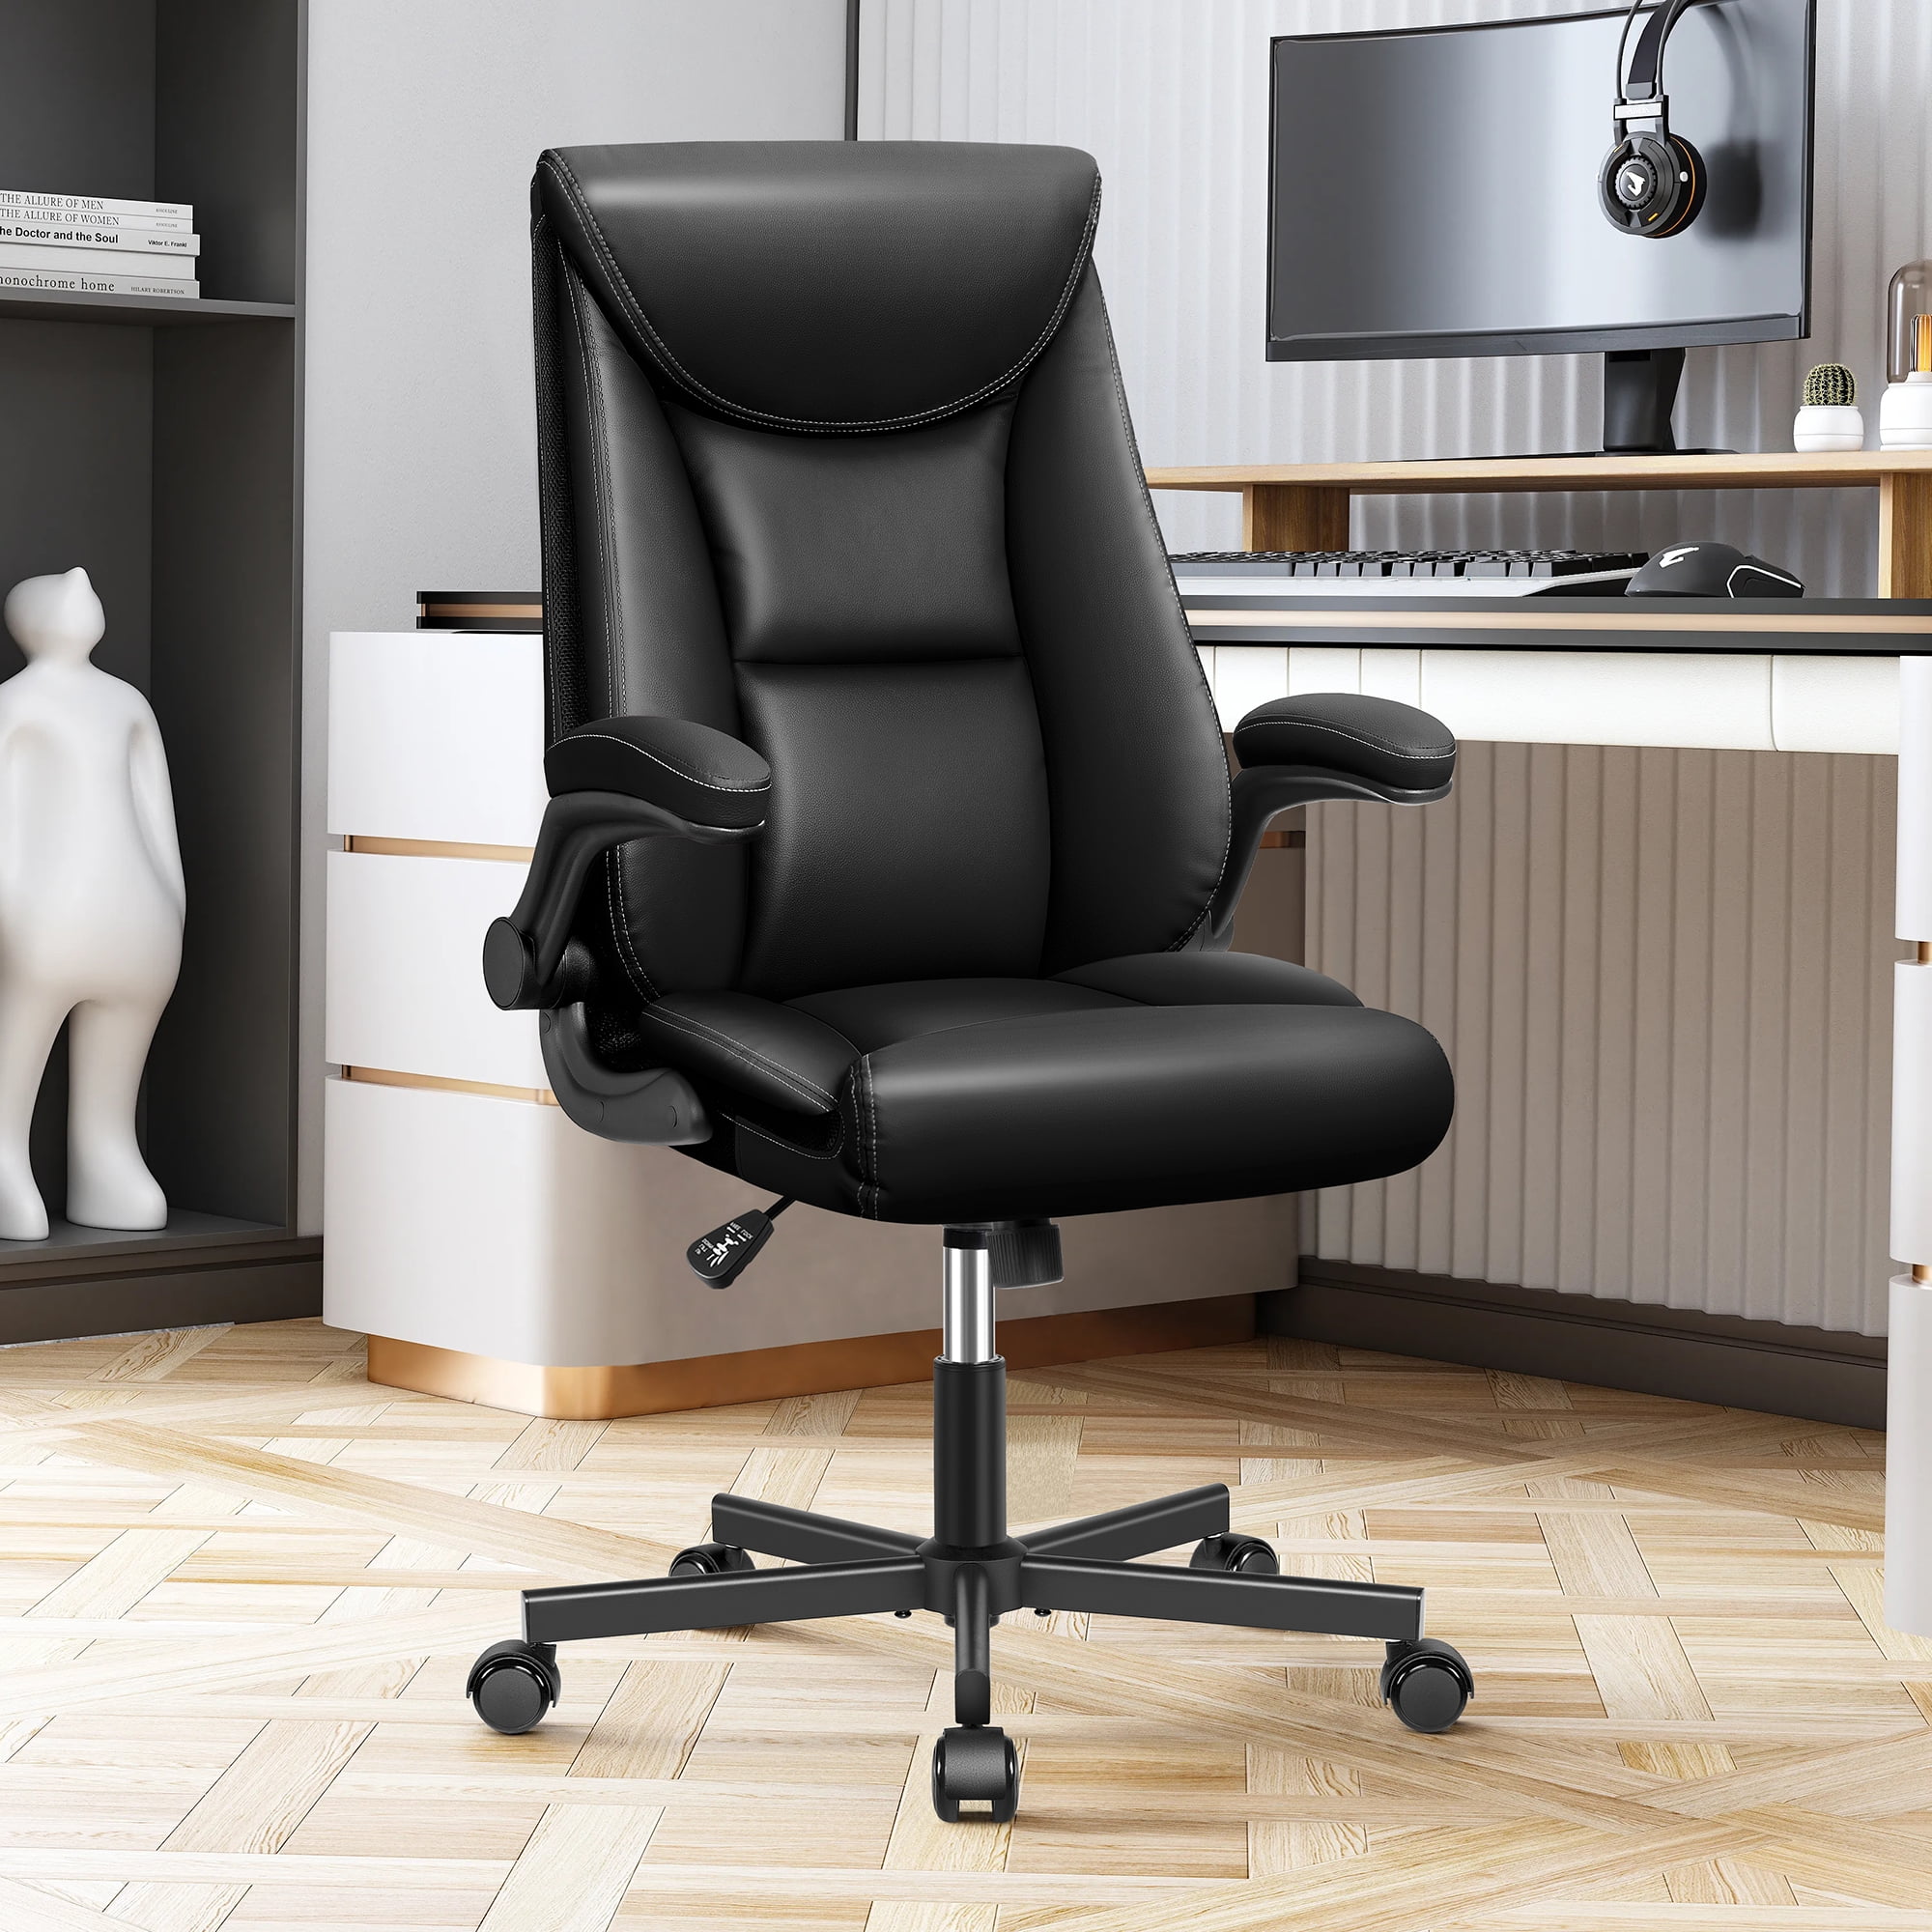 Coolhut Executive Office Chair, Leather Ergonomic Big and Tall Home ...